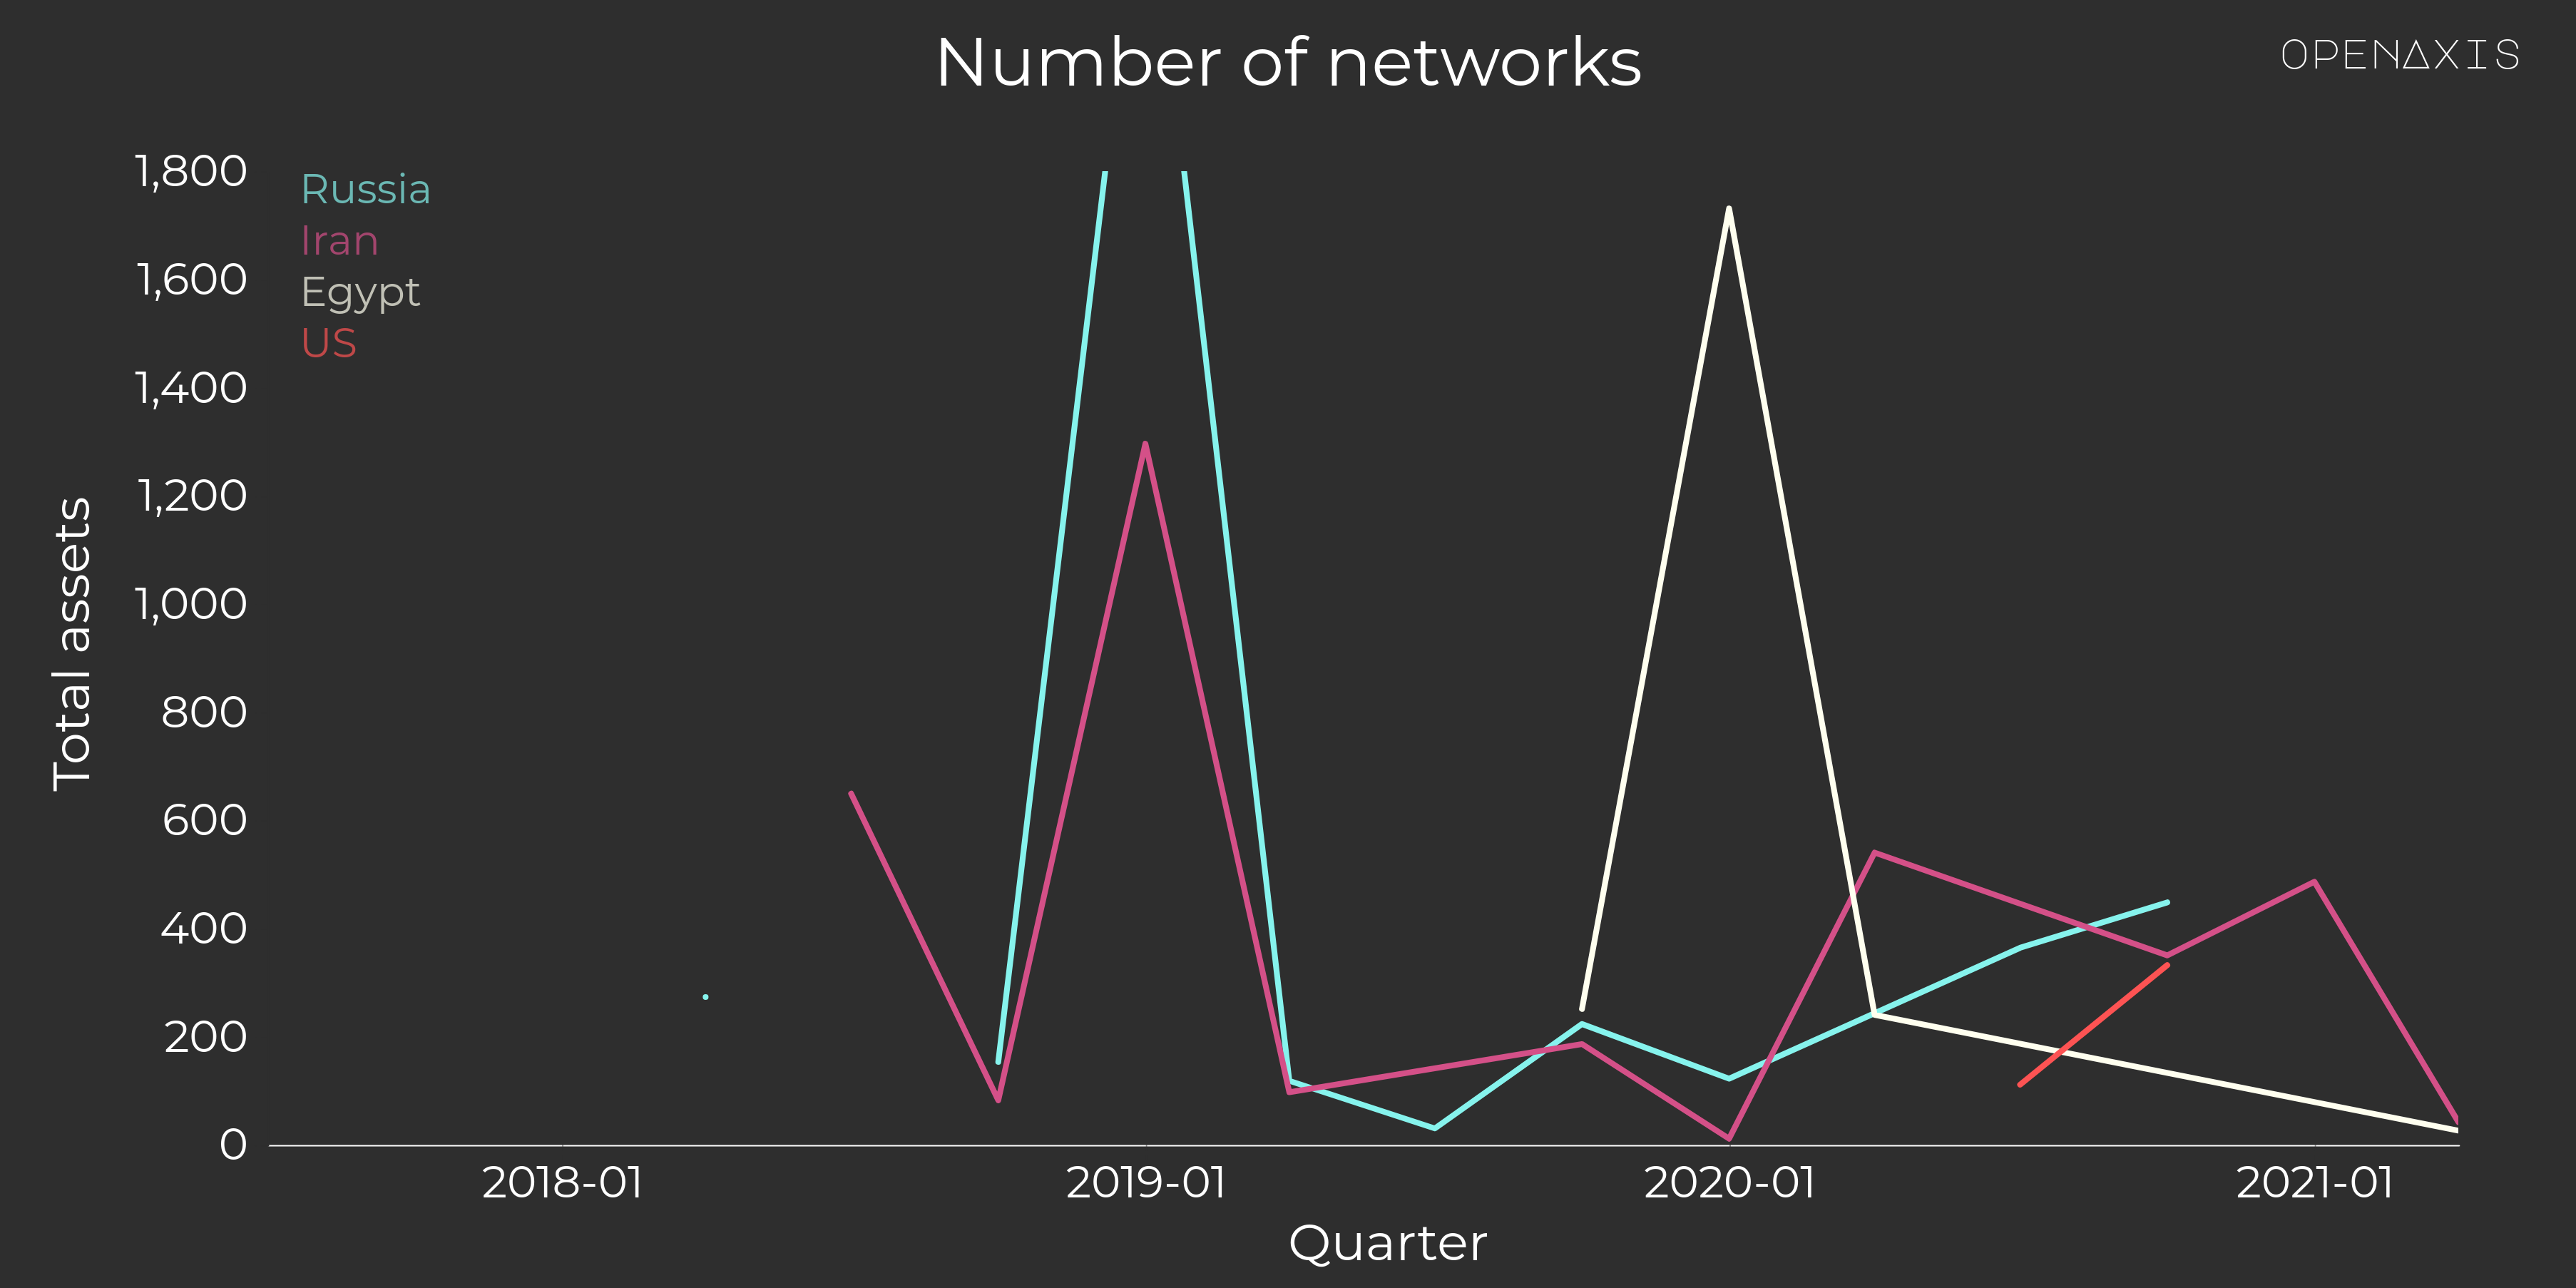 "Number of networks"